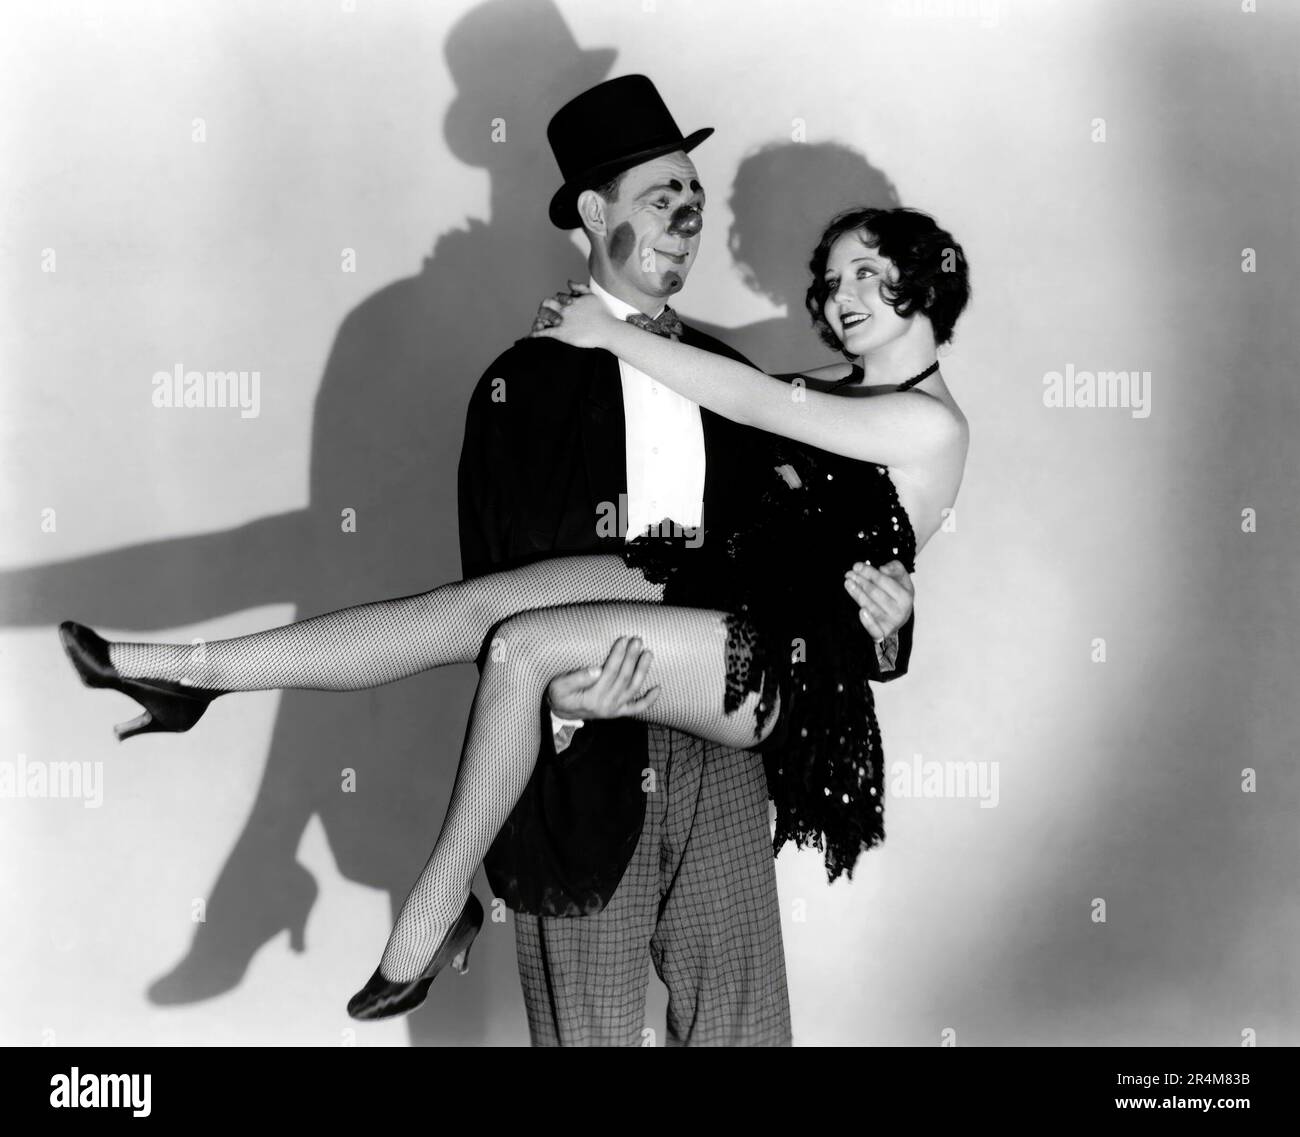 NANCY CARROLL and HAL SKELLY in THE DANCE OF LIFE (1929), directed by JOHN CROMWELL and A. EDWARD SUTHERLAND. Credit: PARAMOUNT PICTURES / Album Stock Photo